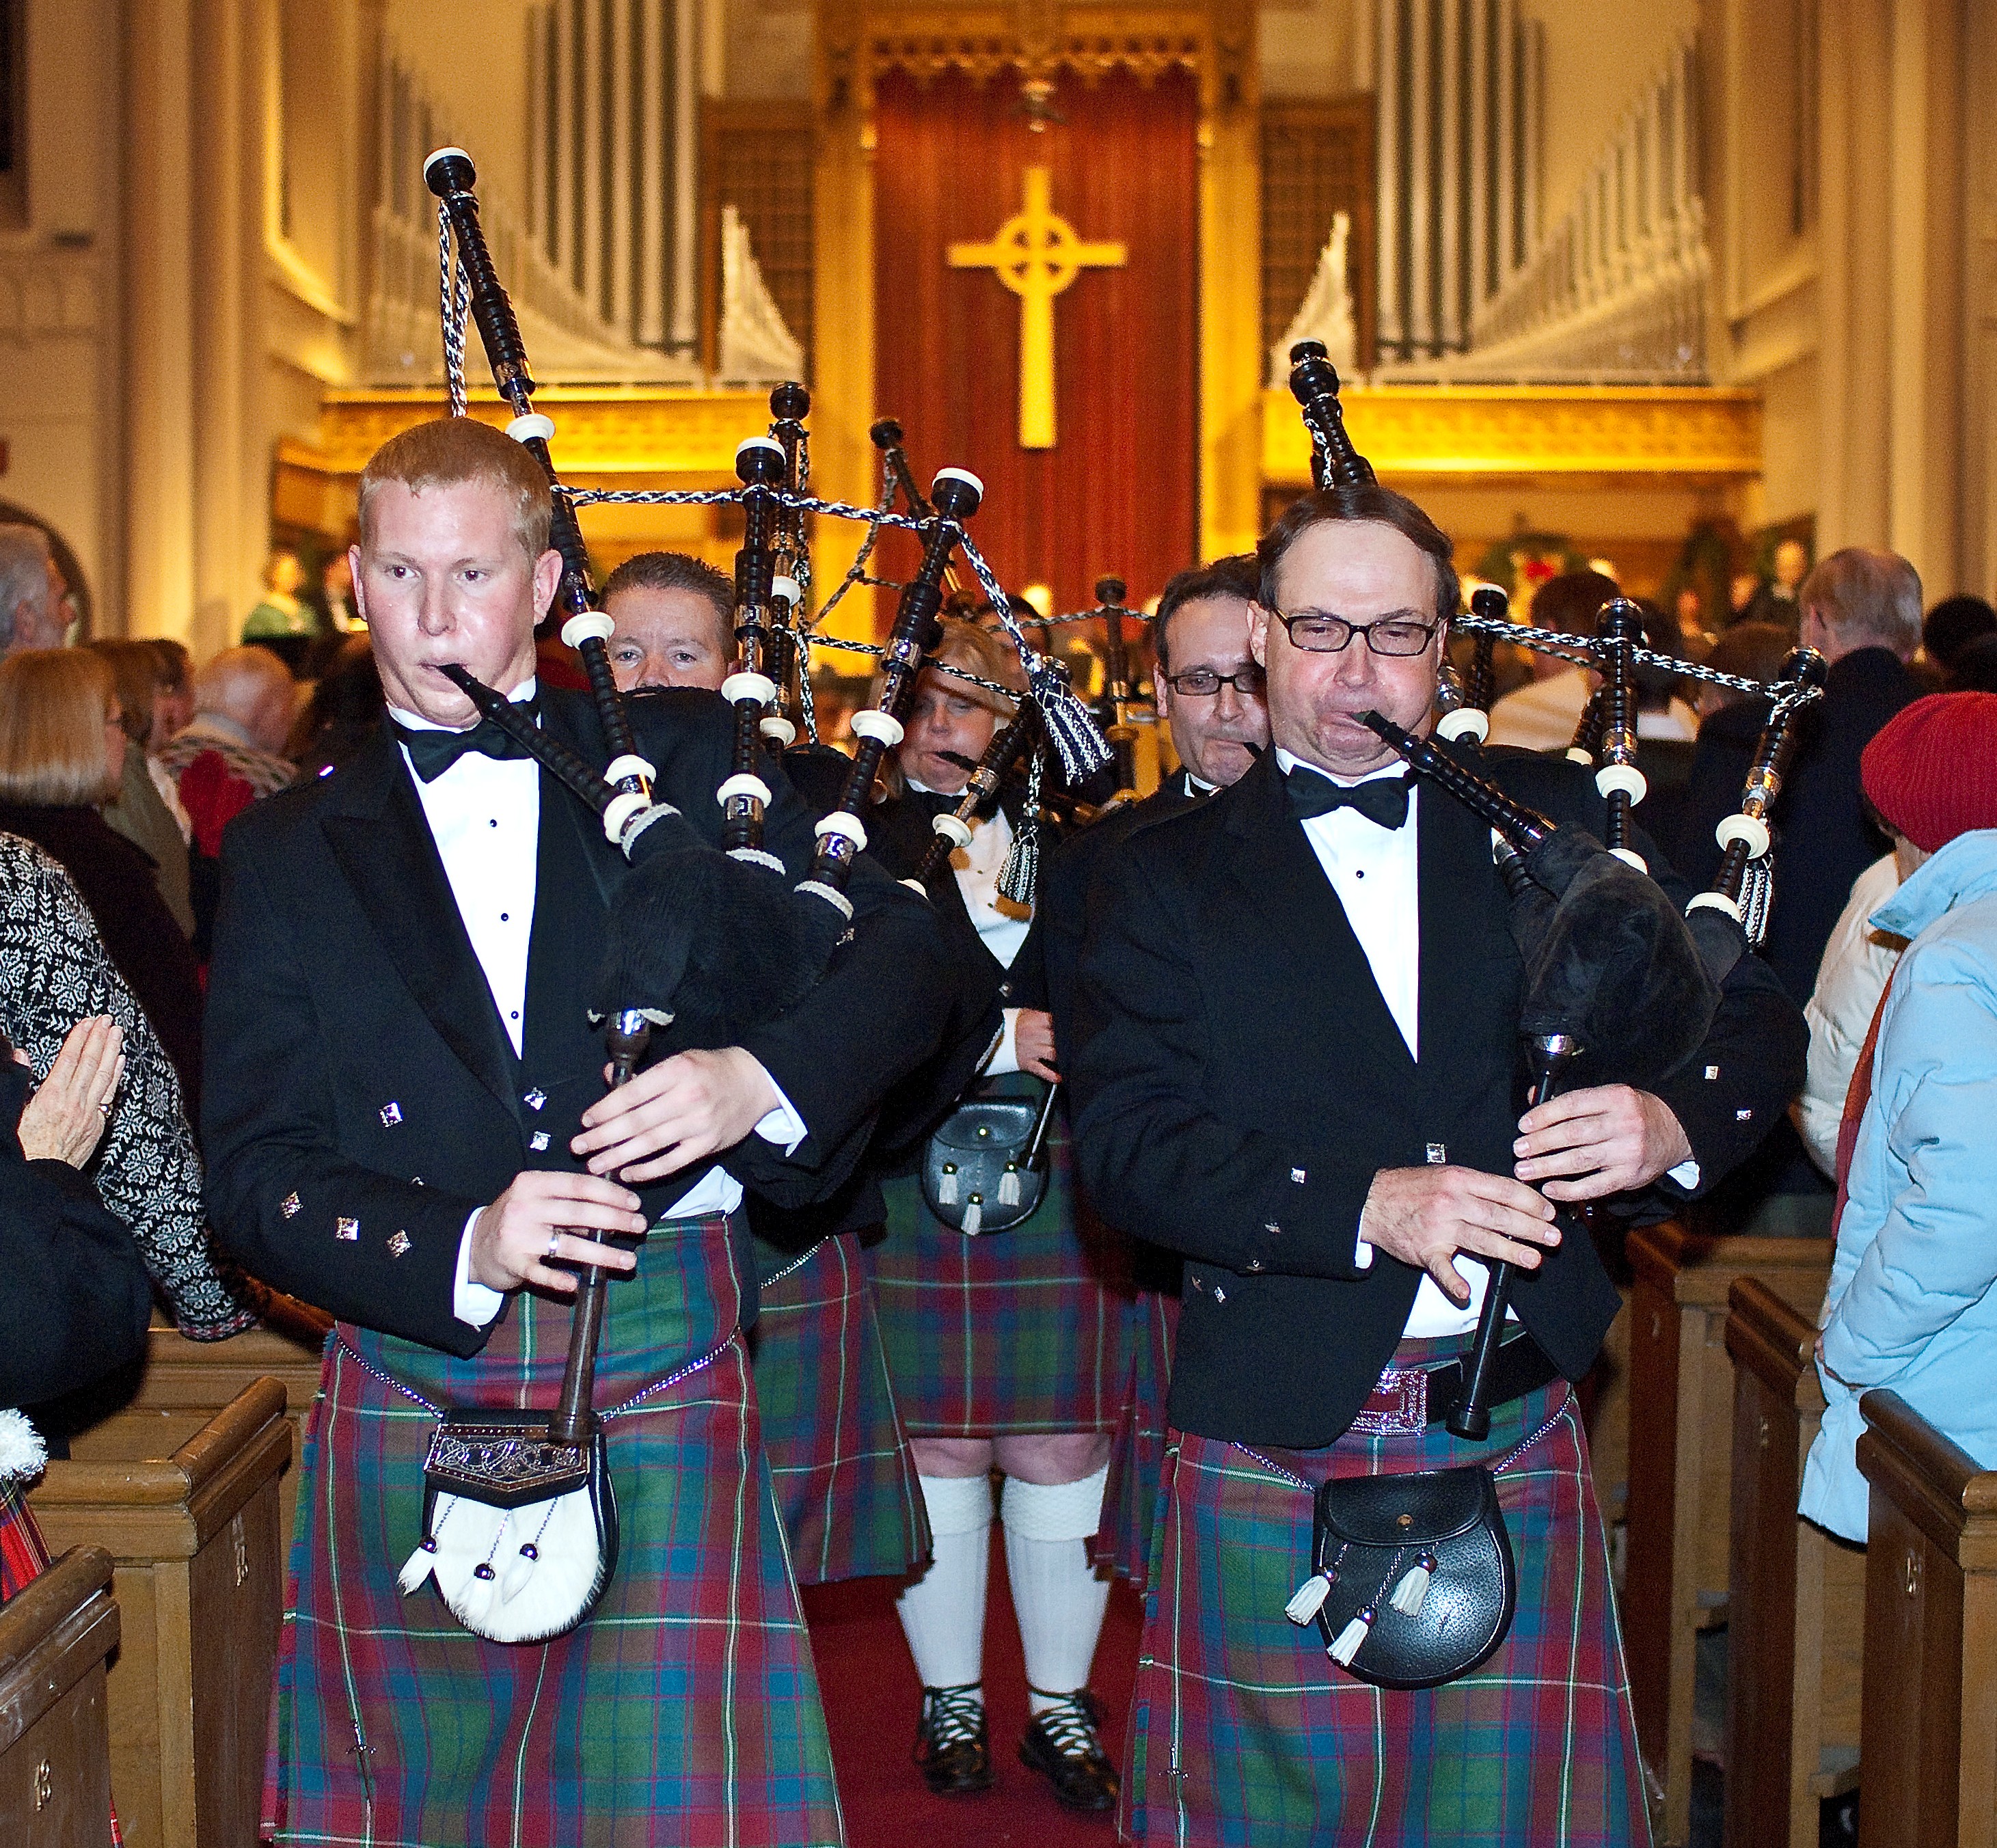 The Pipes of Christmas marches into NYC this December.